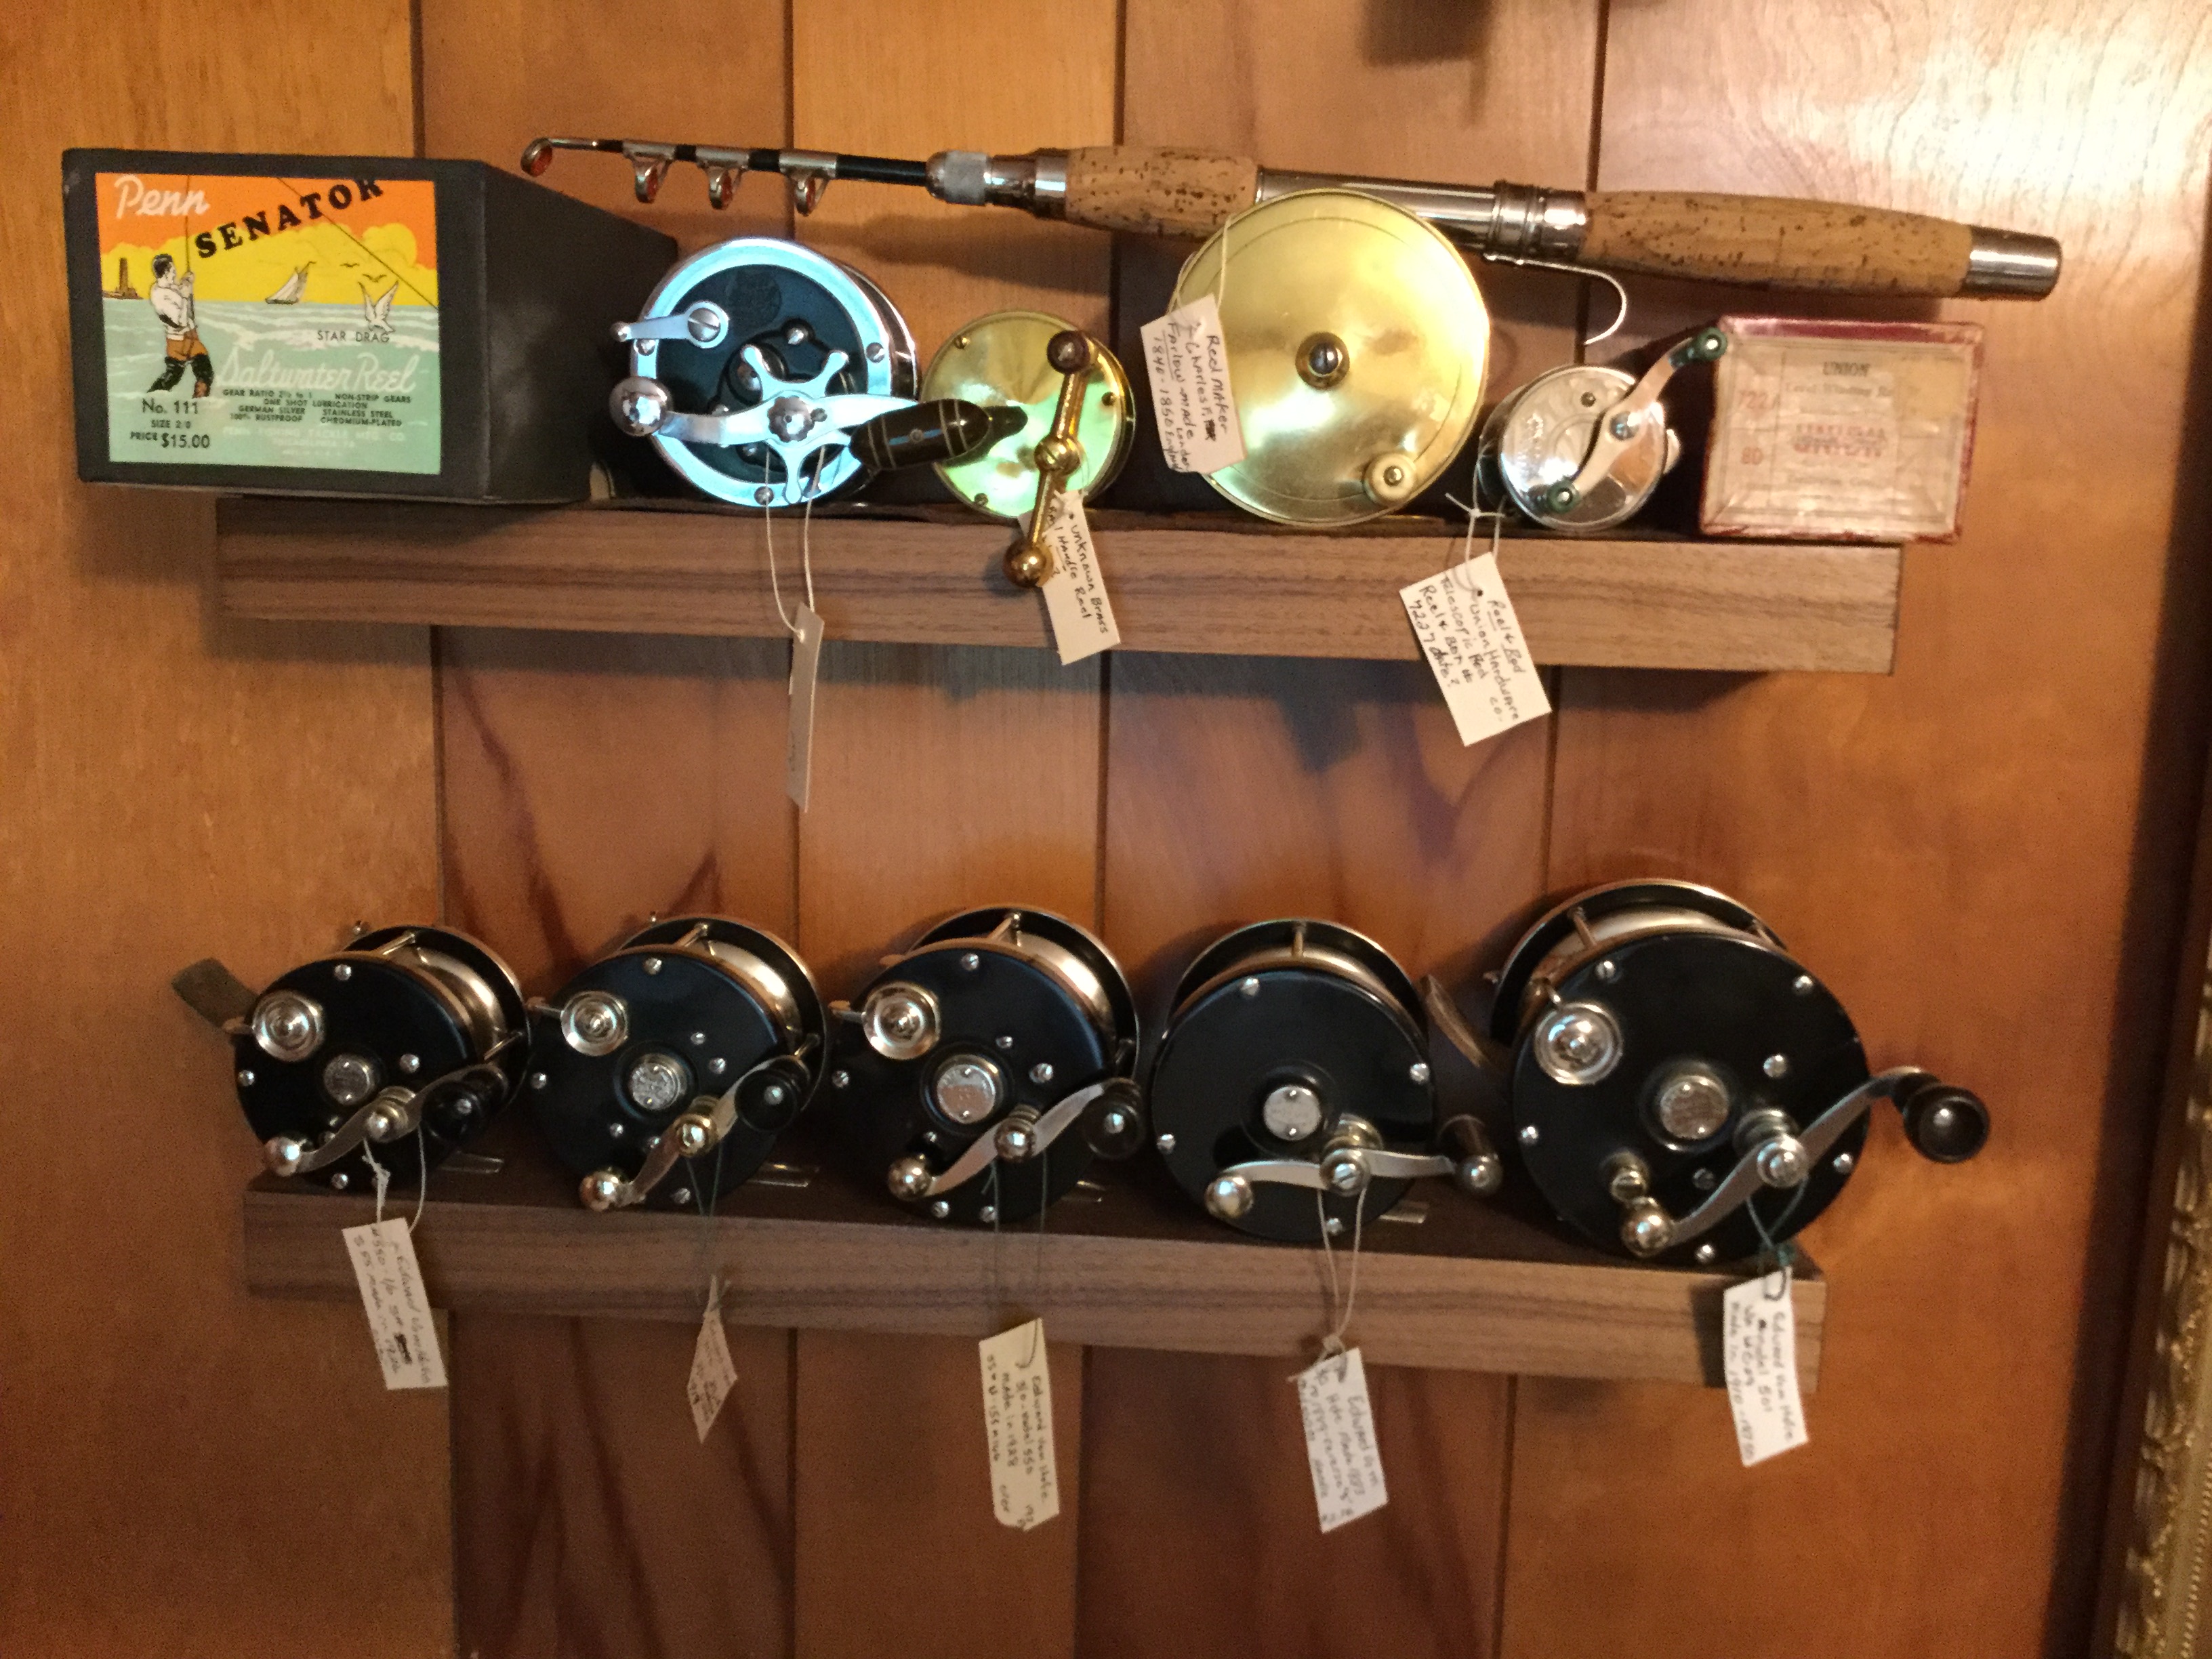 Vintage Fishing Reel Collection